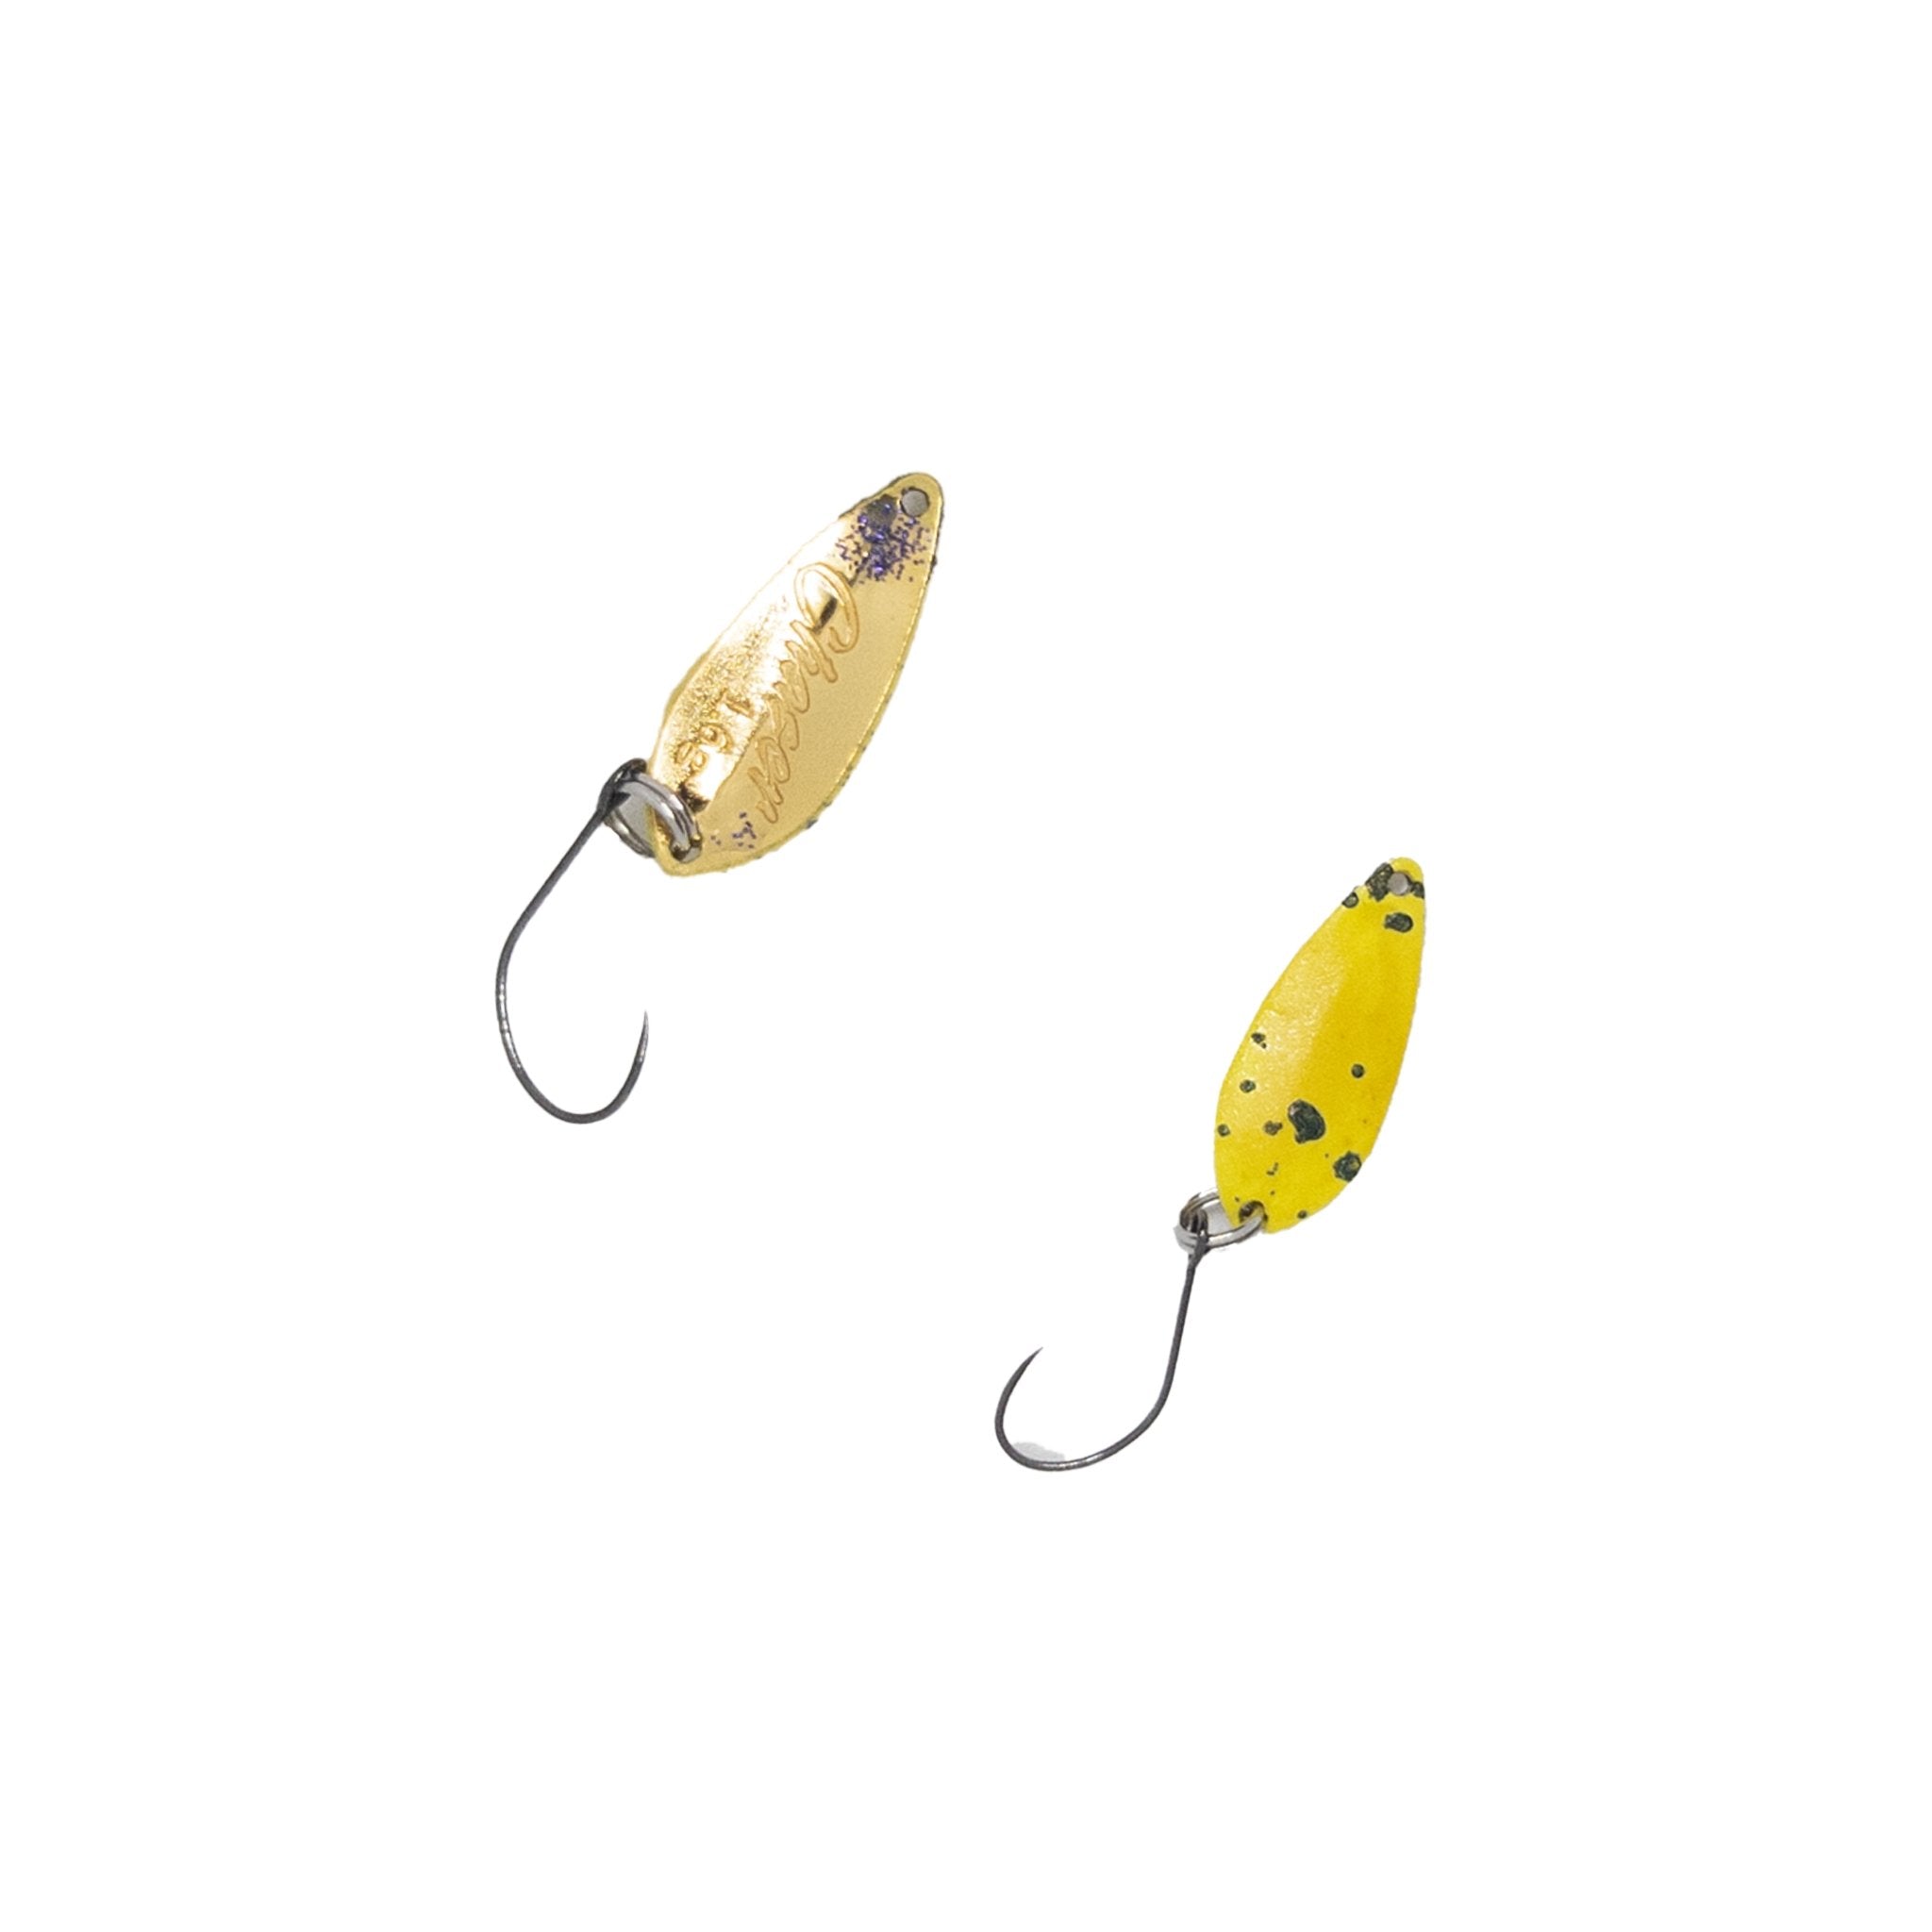 Kōsoku Trout Spoon 1.6g COLOR 04 Sunflower – The Borrowed Lure